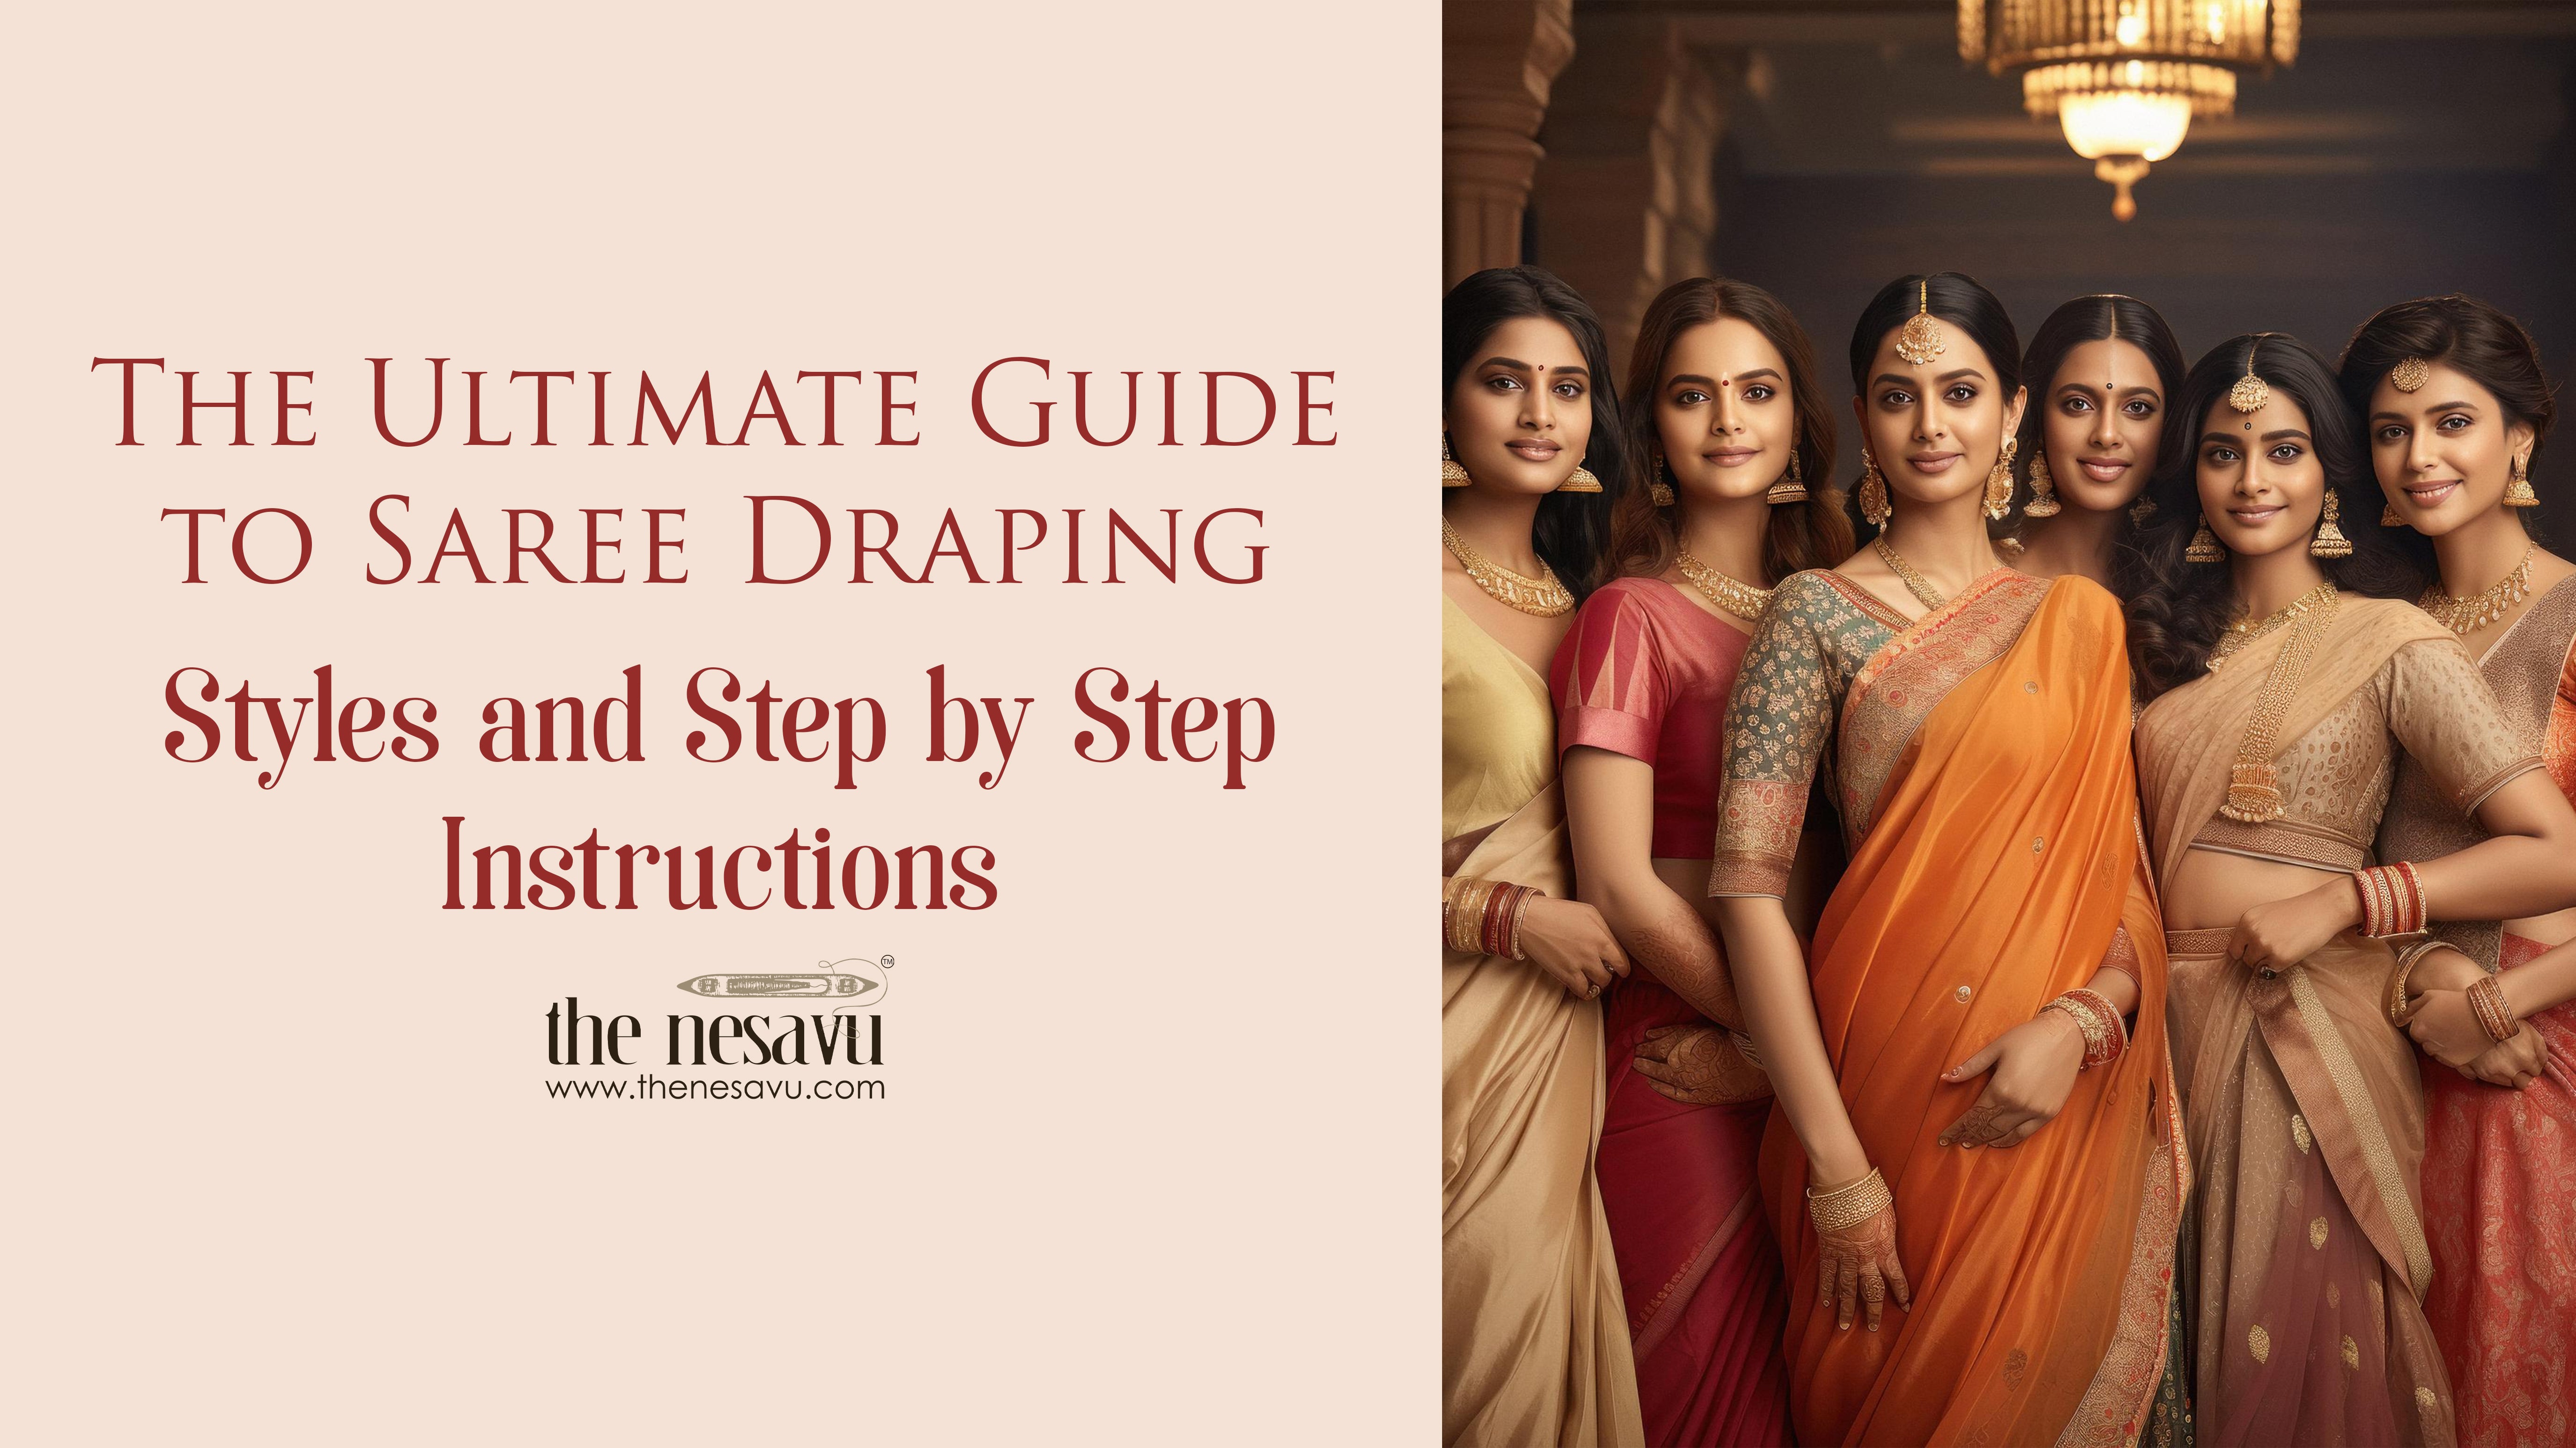 Saree Draping Stylist - Decide on the Design !!! It is important